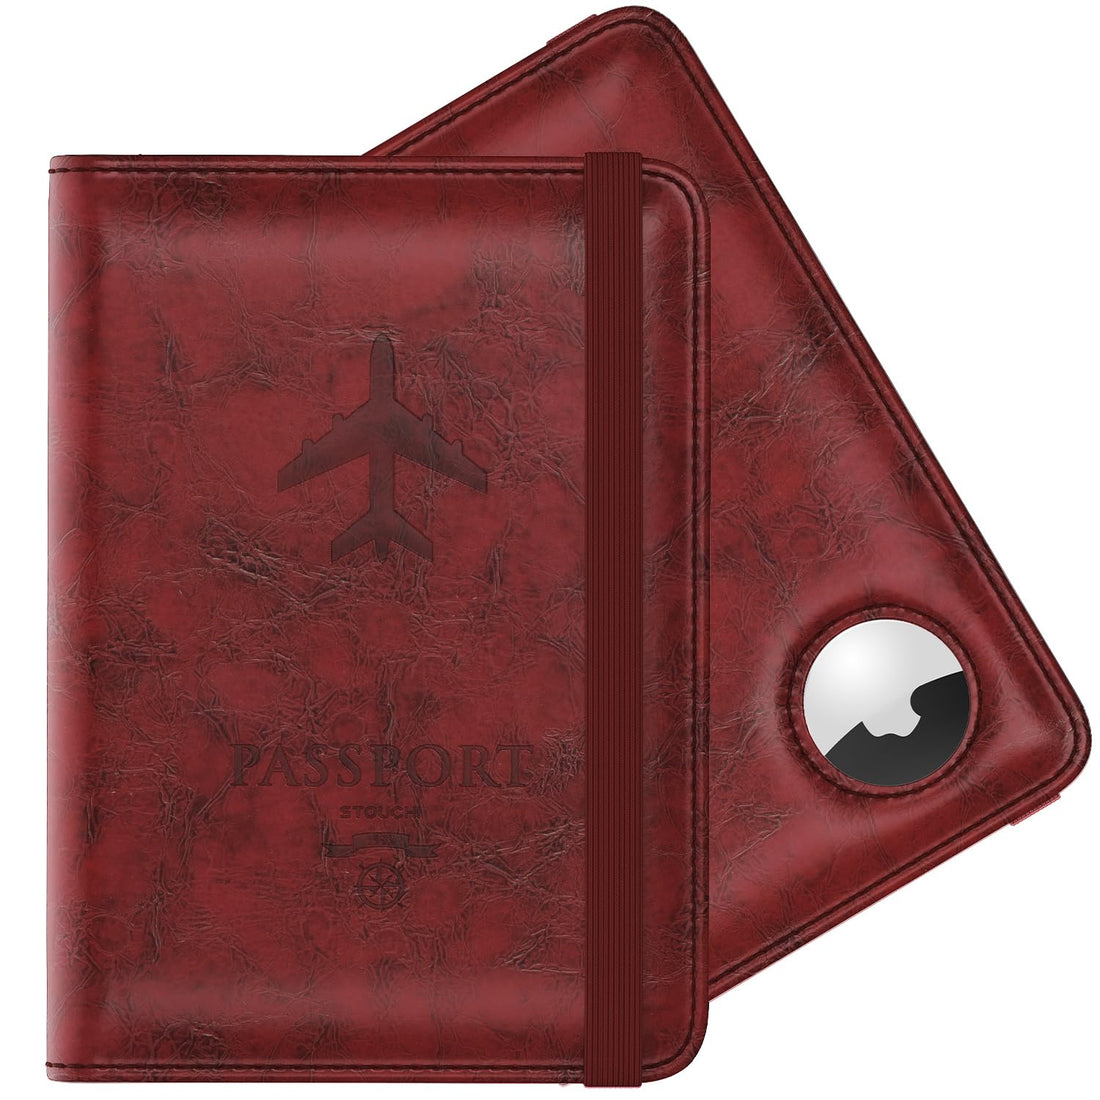 Stouchi AirTag Passport Holder, Simple Passport Holder with Airtag Slot, Passport Wallet Cover for Women, Family Leather Passport Protector Case, Anti-Lost Travel Accessories, Red